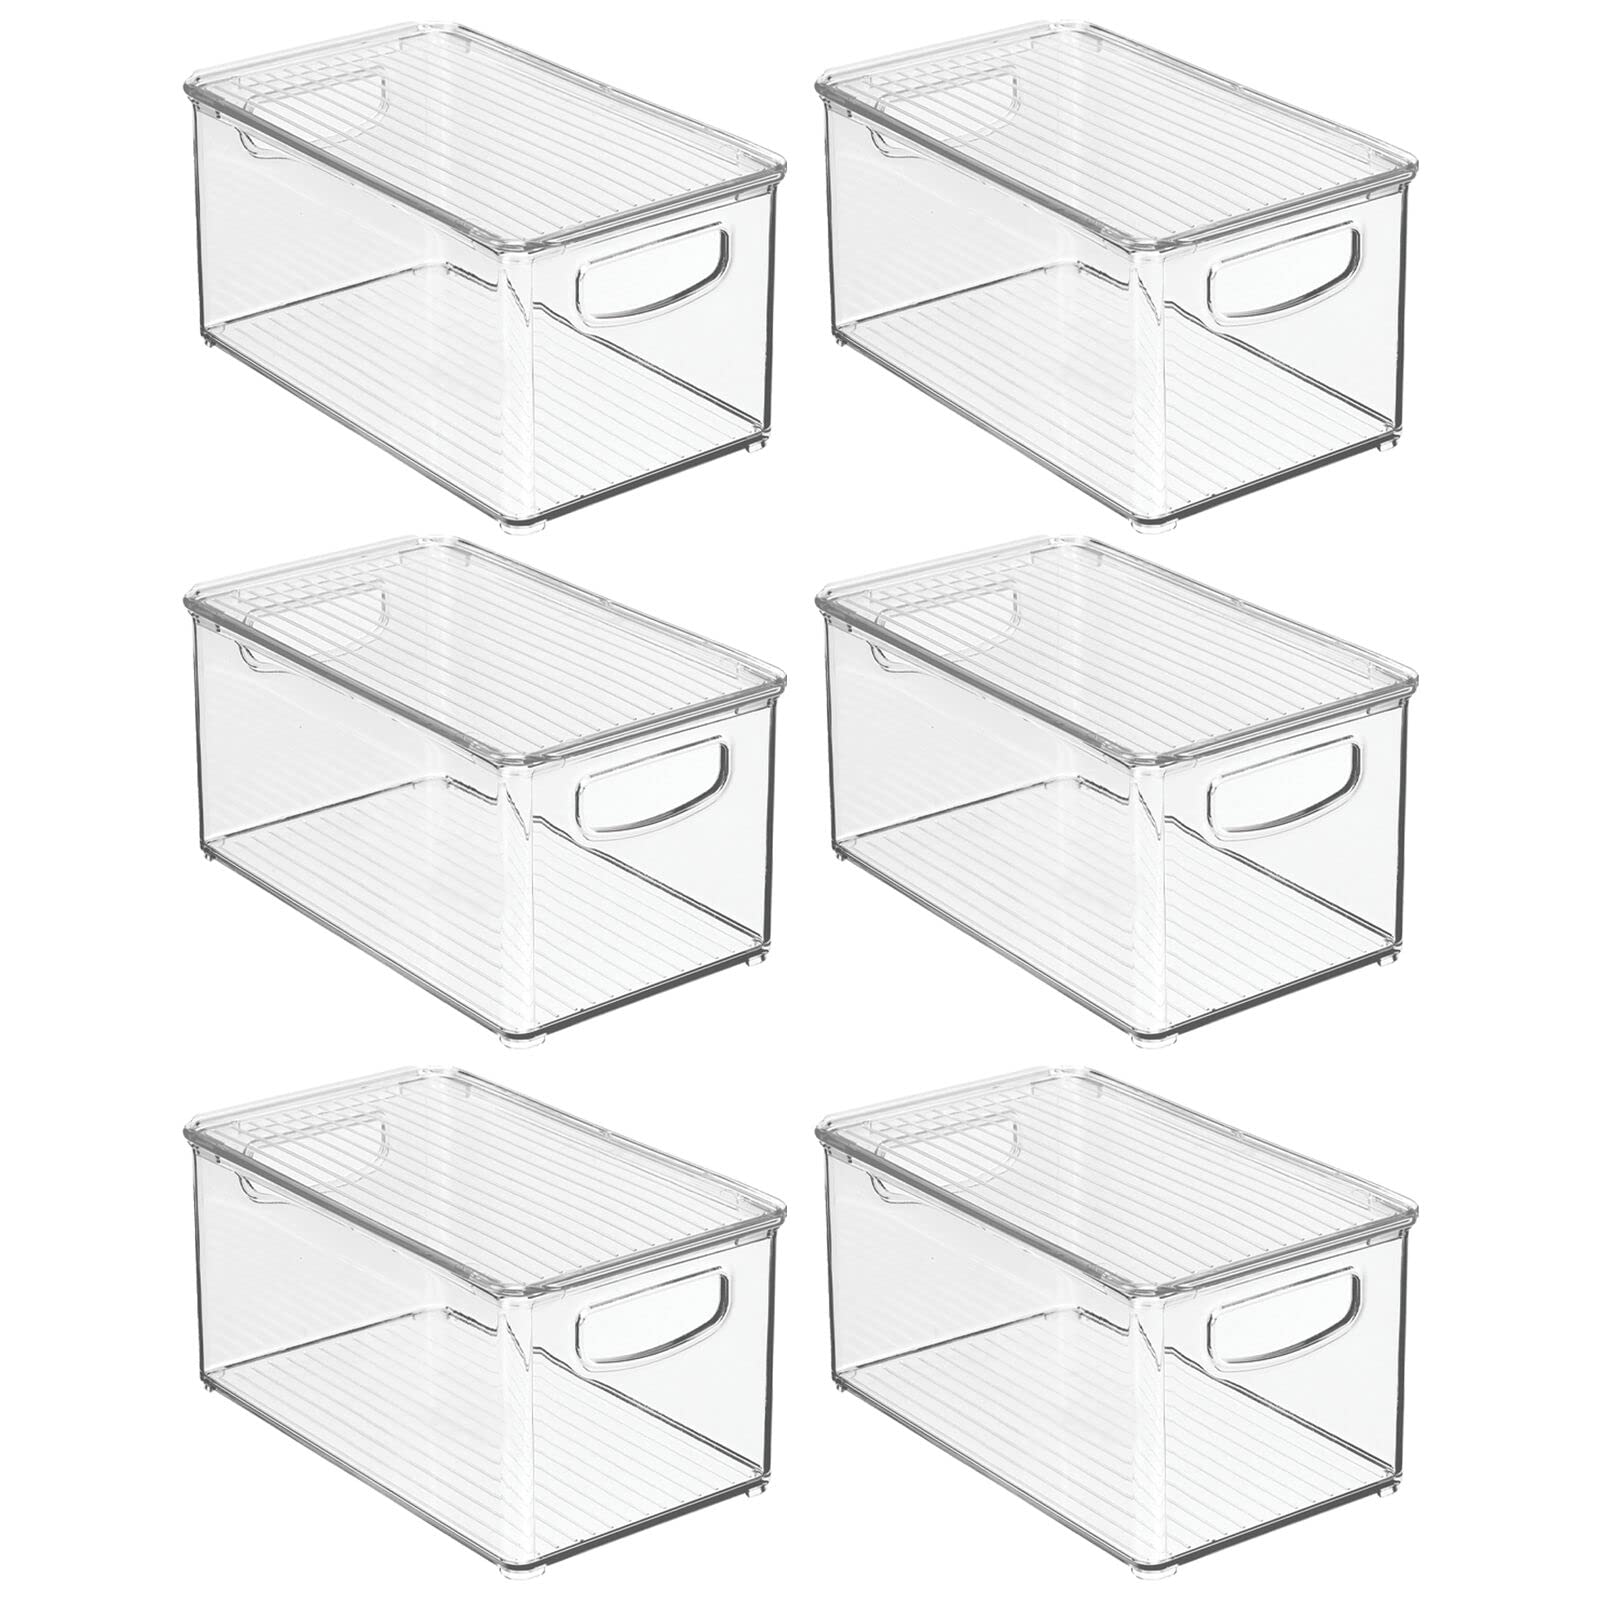 mDesign Plastic Deep Storage Bin Box Container with Lid and Built-In Handles - Organization for Fruit, Snacks, or Food in Kitchen Pantry, Cabinet, or Cupboard, Ligne Collection, 6 Pack, Clear